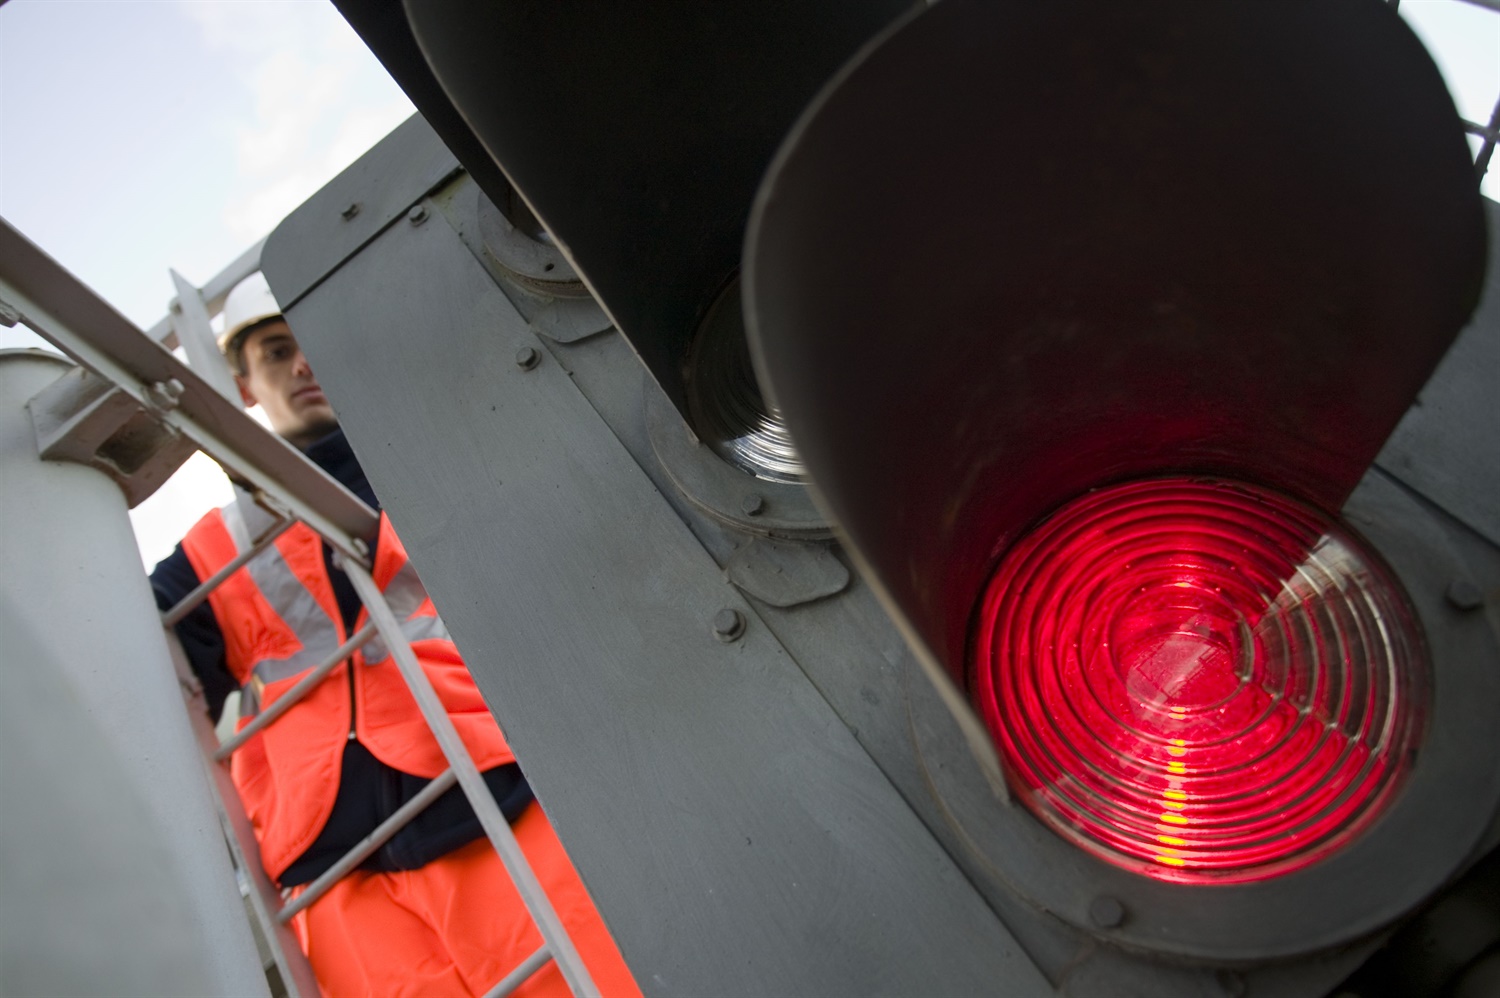 Atkins awarded £29m deal for innovative Anglia re-signalling programme